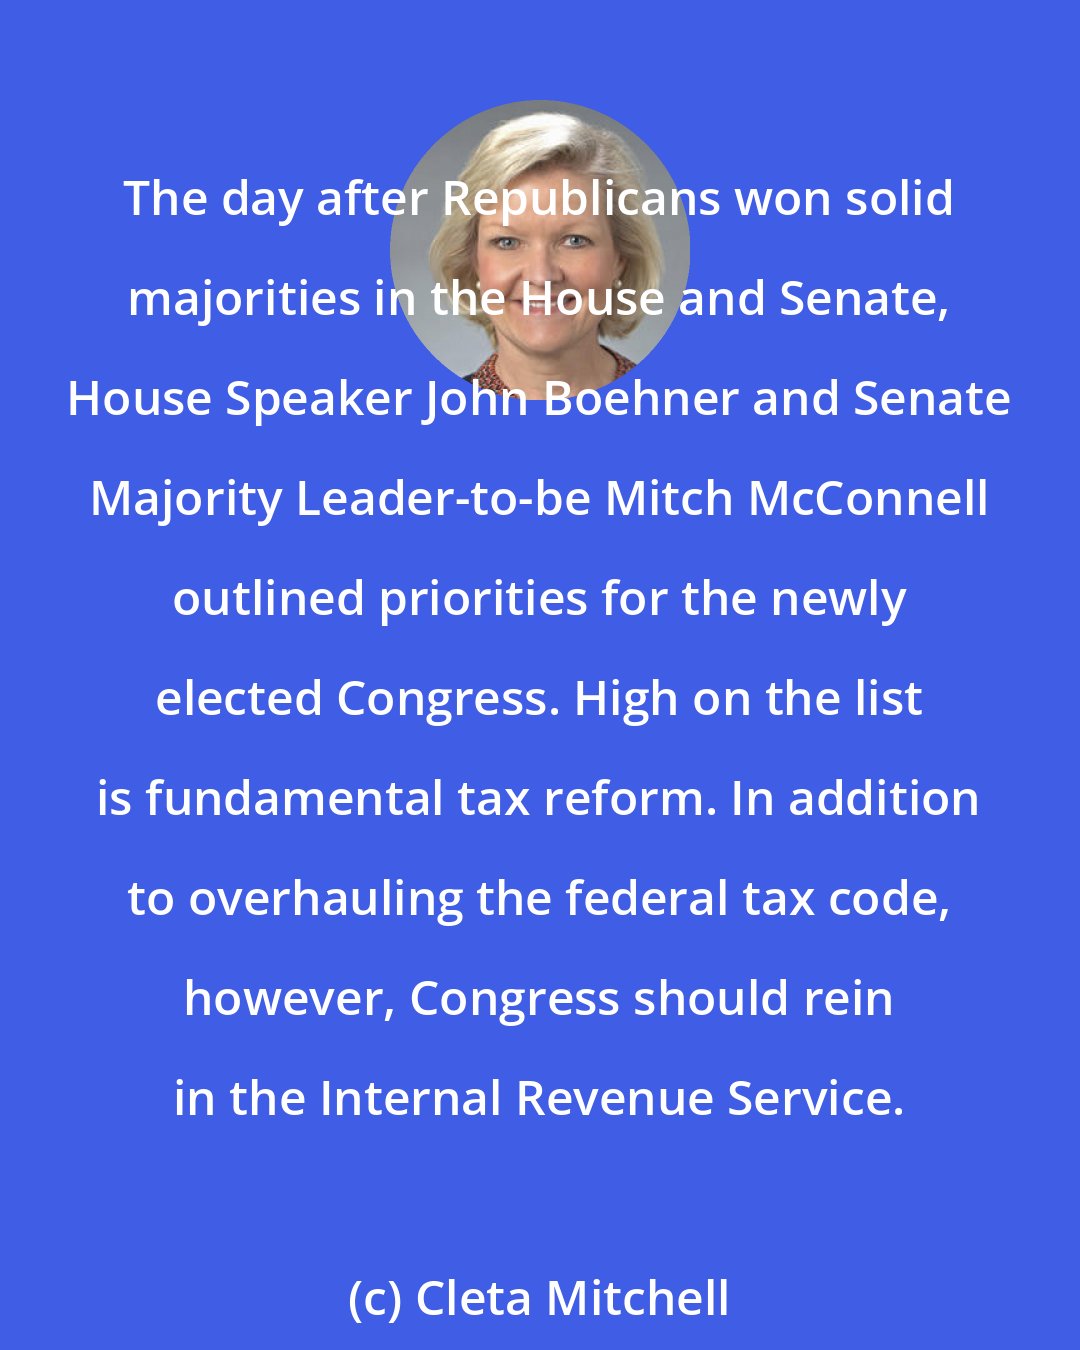 Cleta Mitchell: The day after Republicans won solid majorities in the House and Senate, House Speaker John Boehner and Senate Majority Leader-to-be Mitch McConnell outlined priorities for the newly elected Congress. High on the list is fundamental tax reform. In addition to overhauling the federal tax code, however, Congress should rein in the Internal Revenue Service.